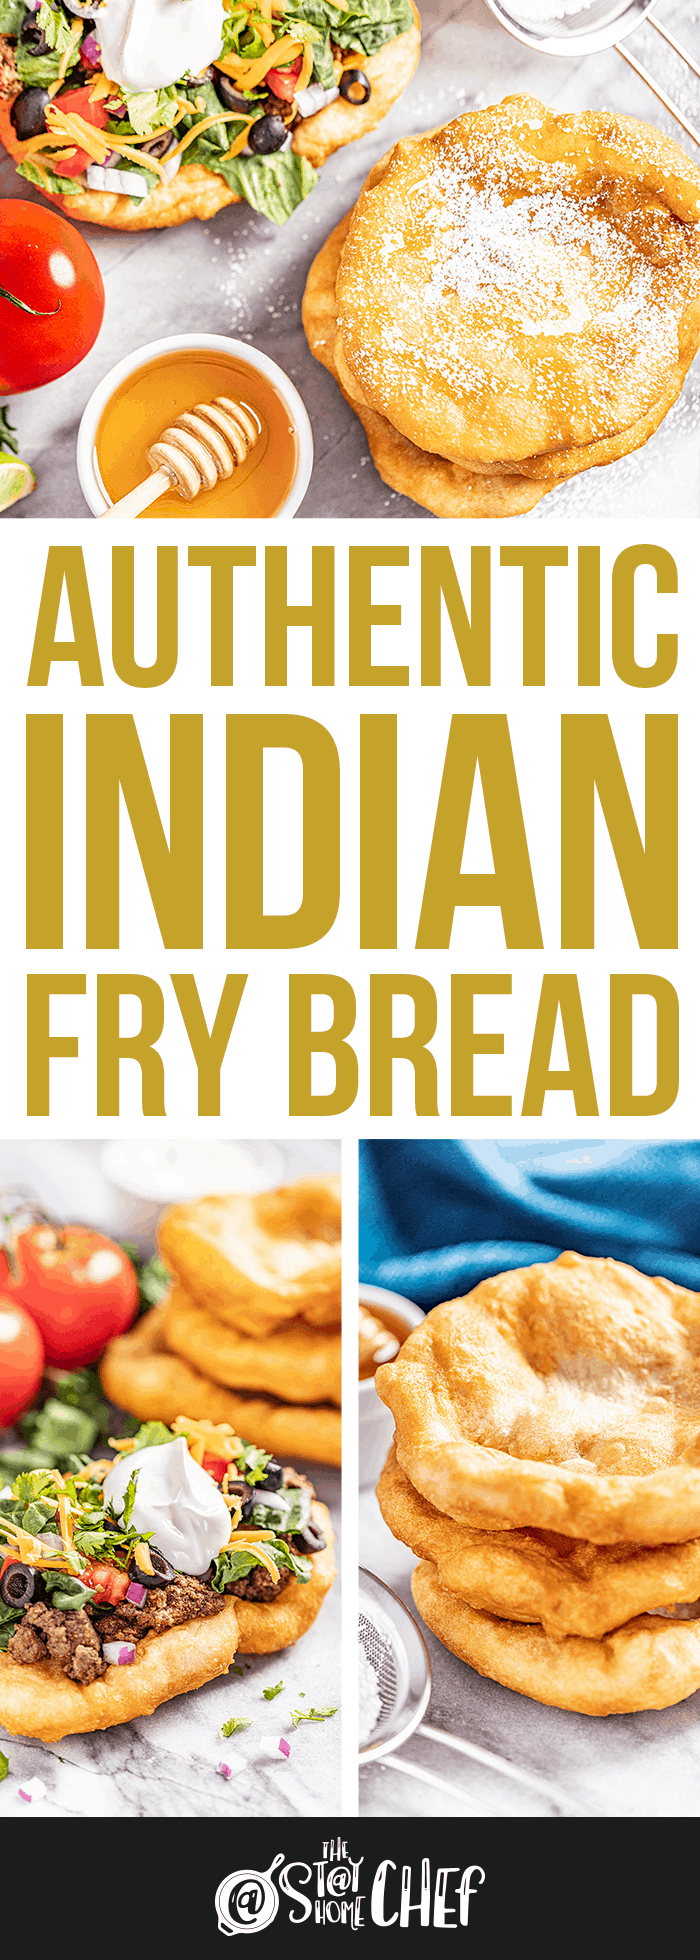 Authentic Indian Fry Bread